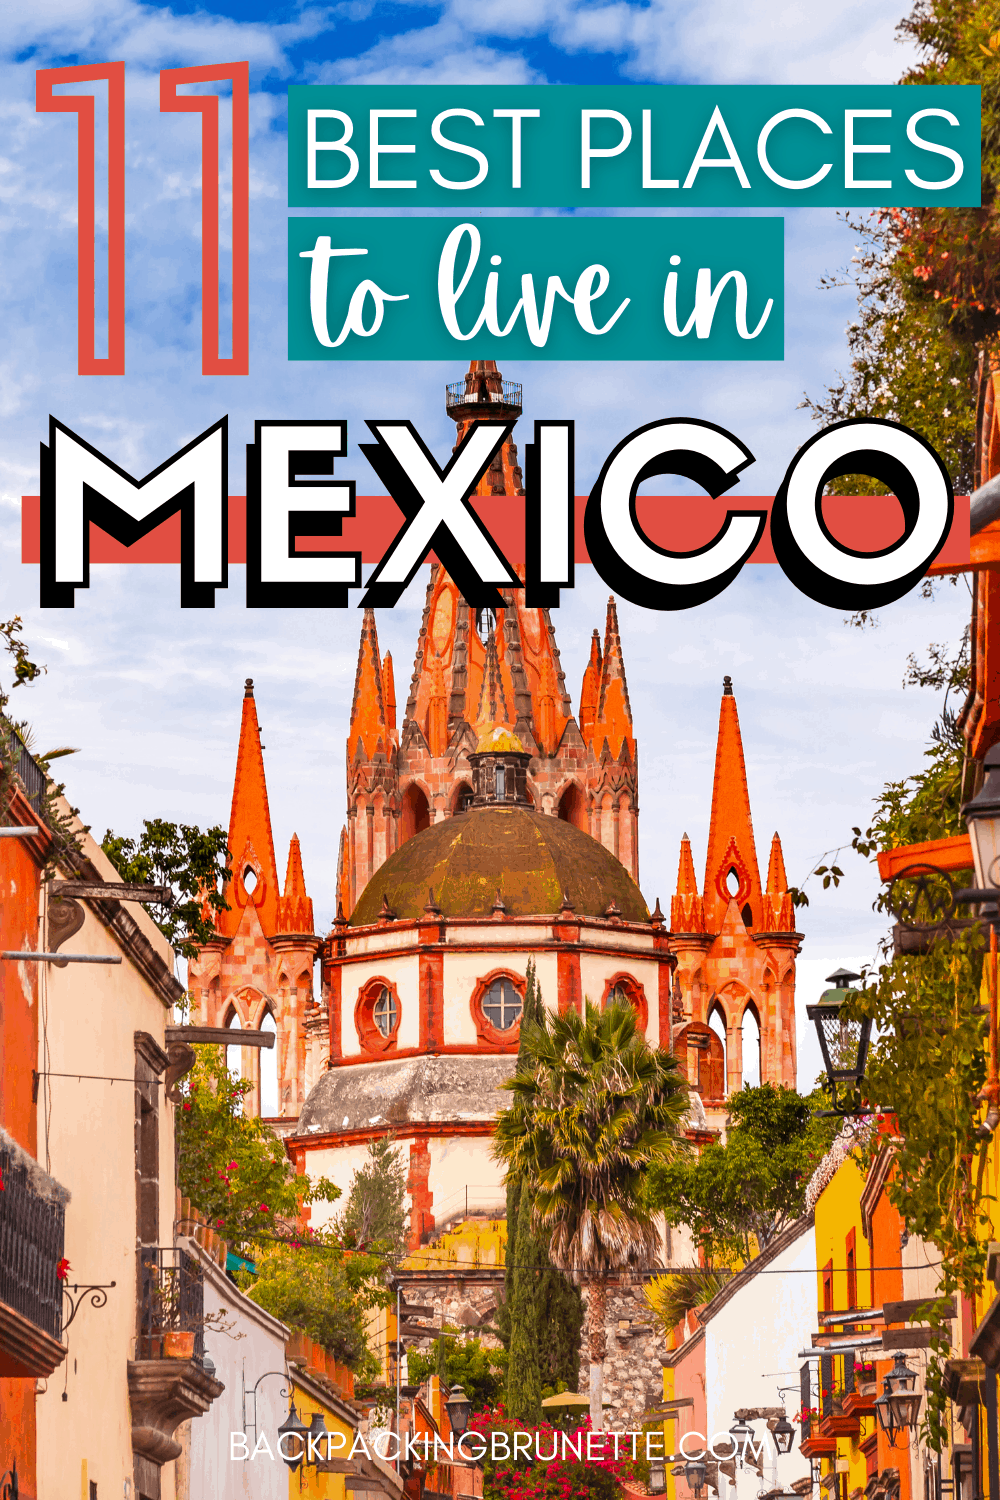 2022 11 Best Places to Live in Mexico for Expats - Backpacking Brunette